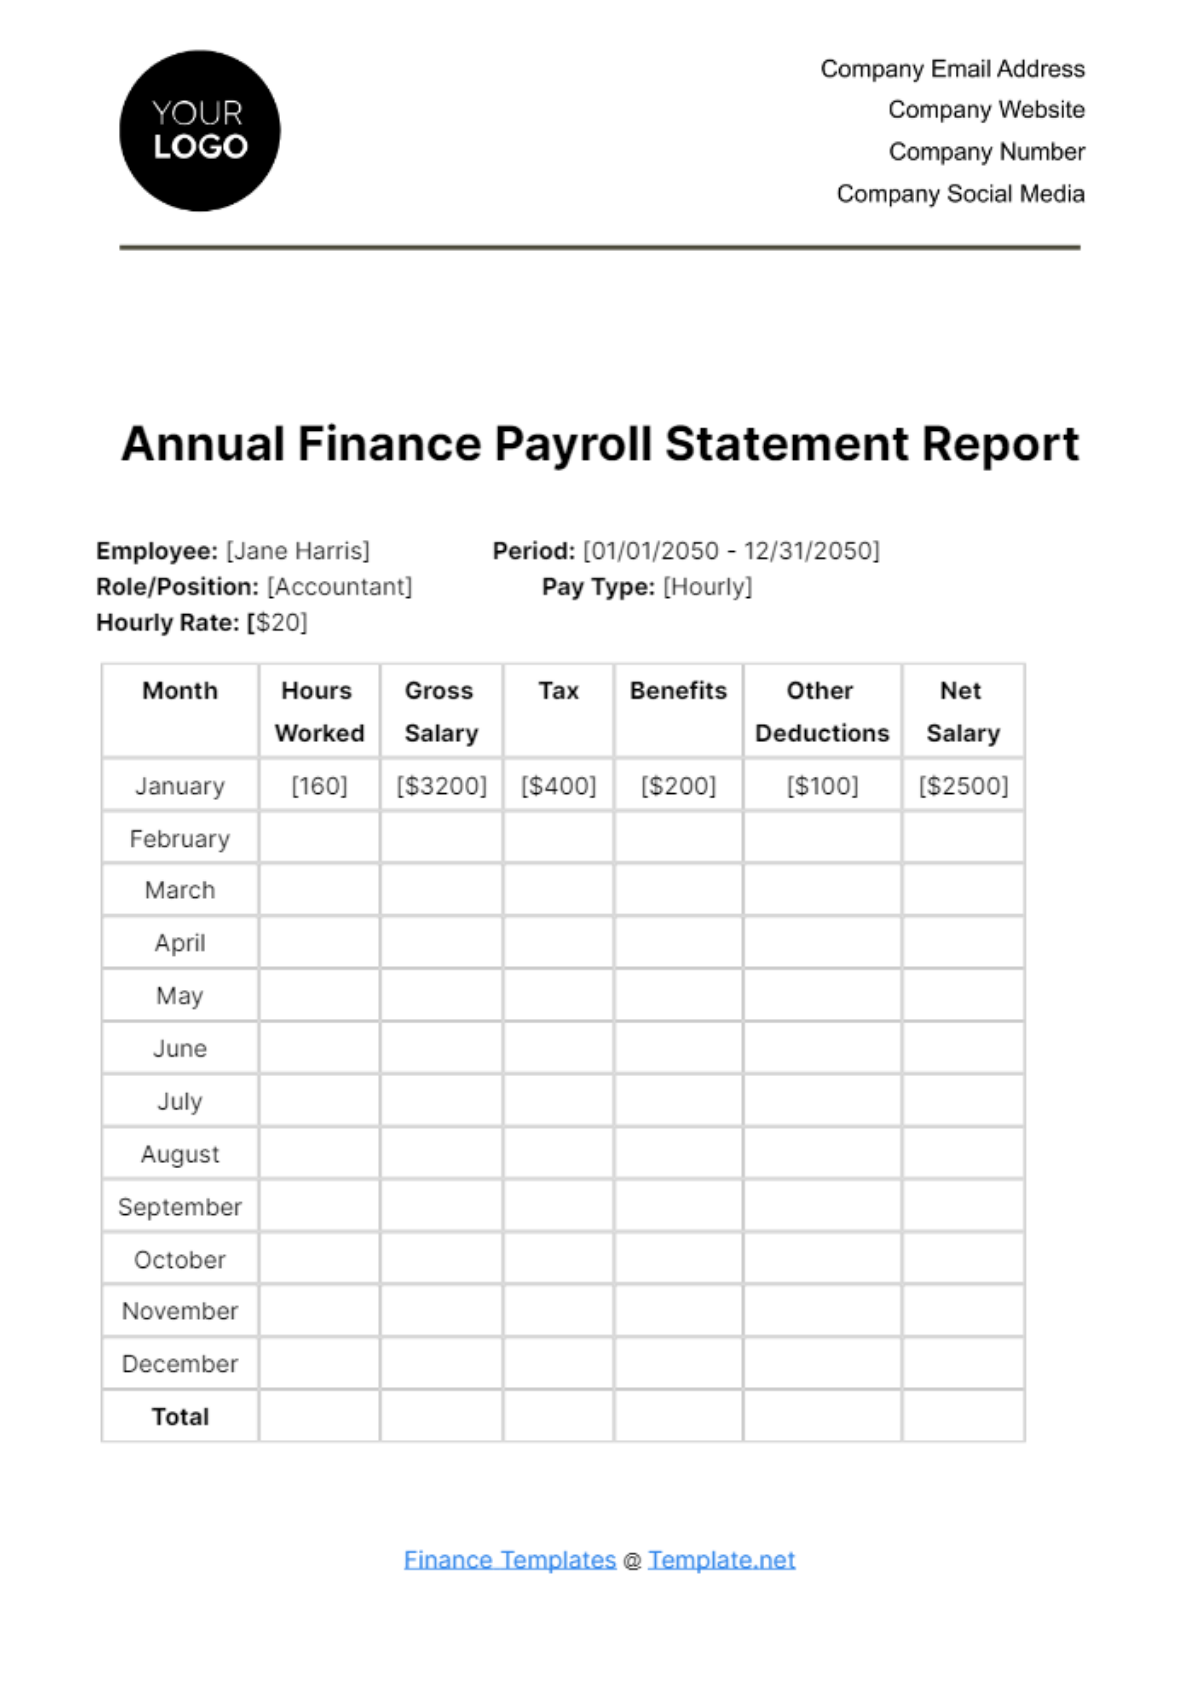 Free Annual Finance Payroll Statement Report Template